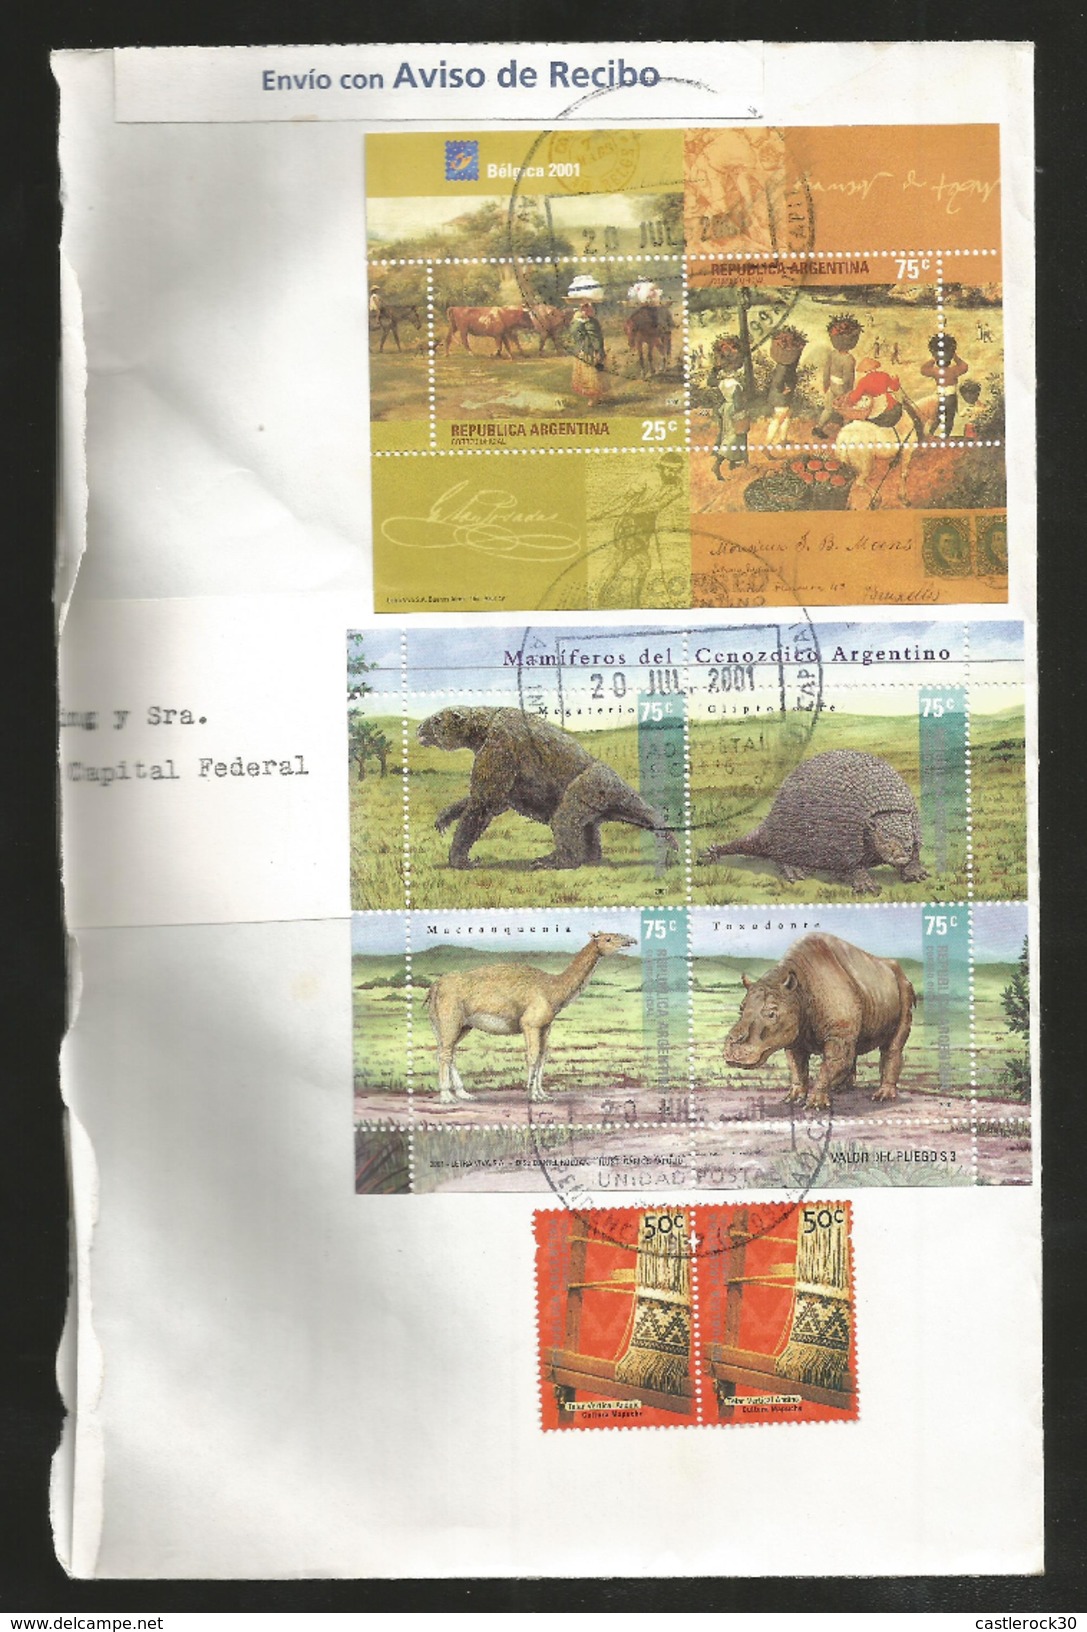 J)2001 ARGENTINA, ARGENTINE CENOZOIC MAMMALS, STAMPS EXHIBITION BRUSSELS AND LOOM,  AIRMAIL CIRCULATED COVER, MULTIPLE S - Covers & Documents